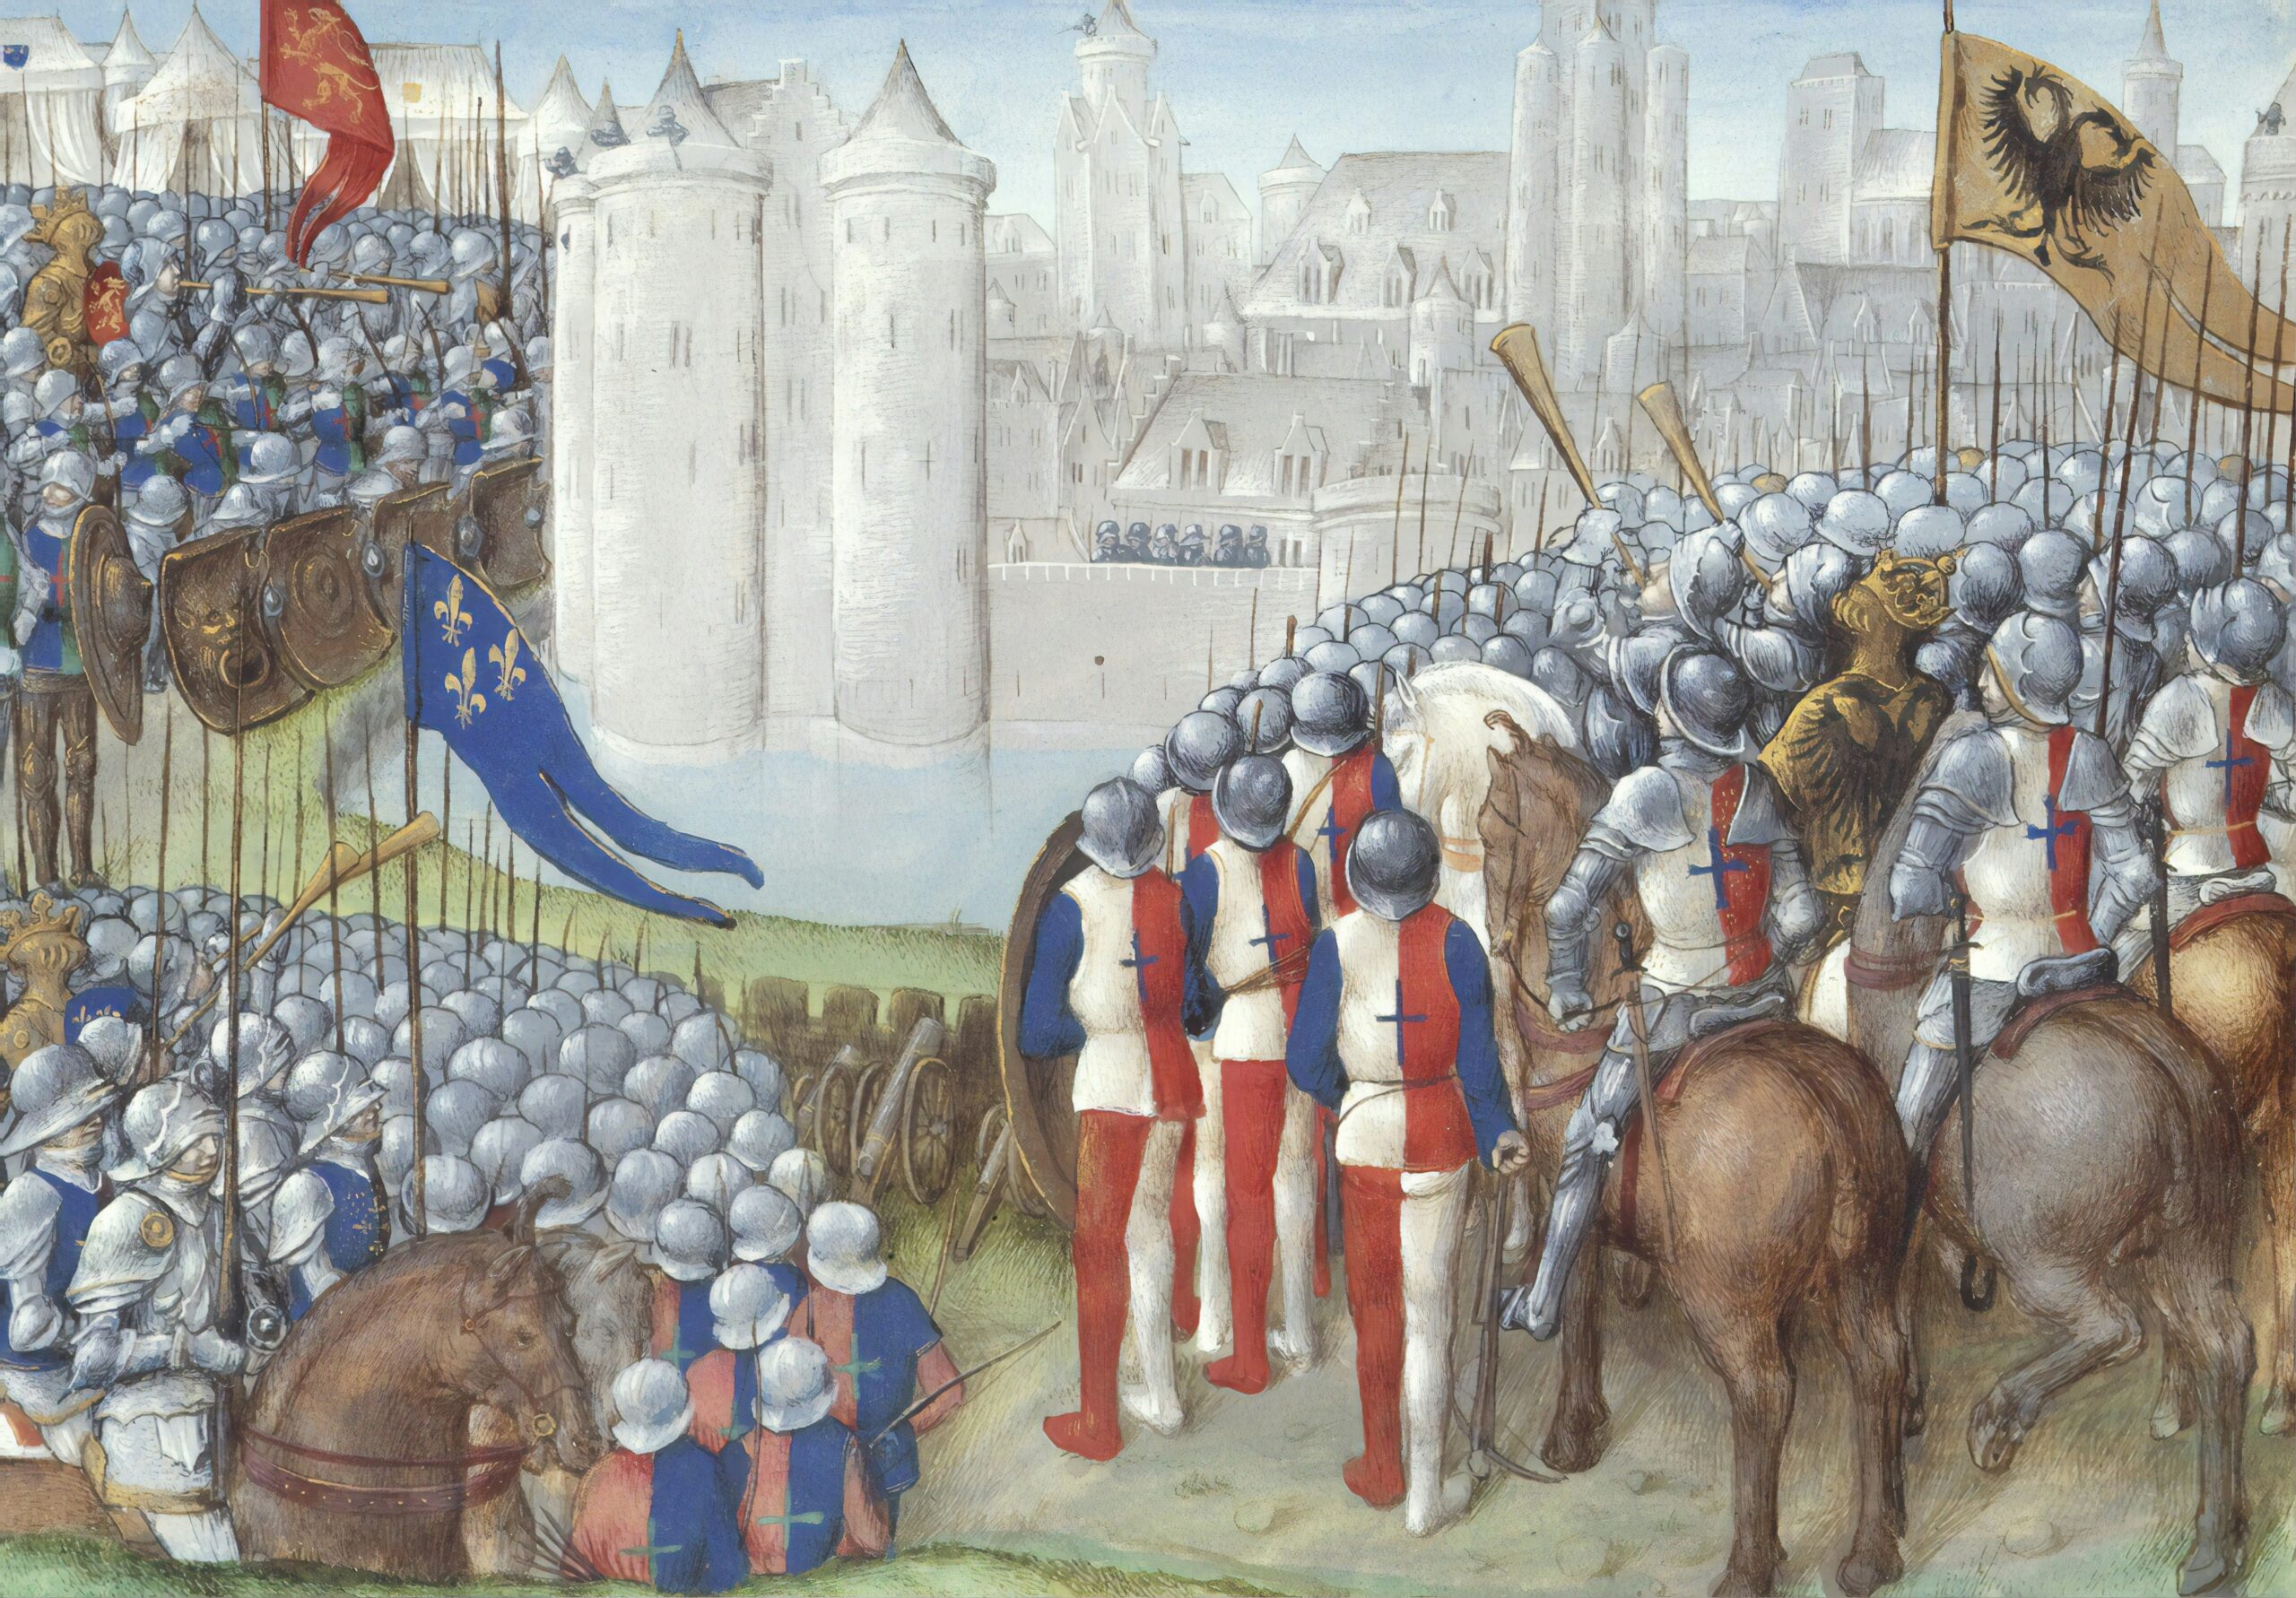 Siege of Damascus during the Second Crusade, 1148; with the armies of King Baldwin III of Jerusalem, King Louis VII of France, and right, Emperor Conrad III of Germany, Image taken from Chronique d'Ernoul et de Bernard le Trésorier. Originally published/produced in S. Netherlands (Bruges); late 15th century - British Library